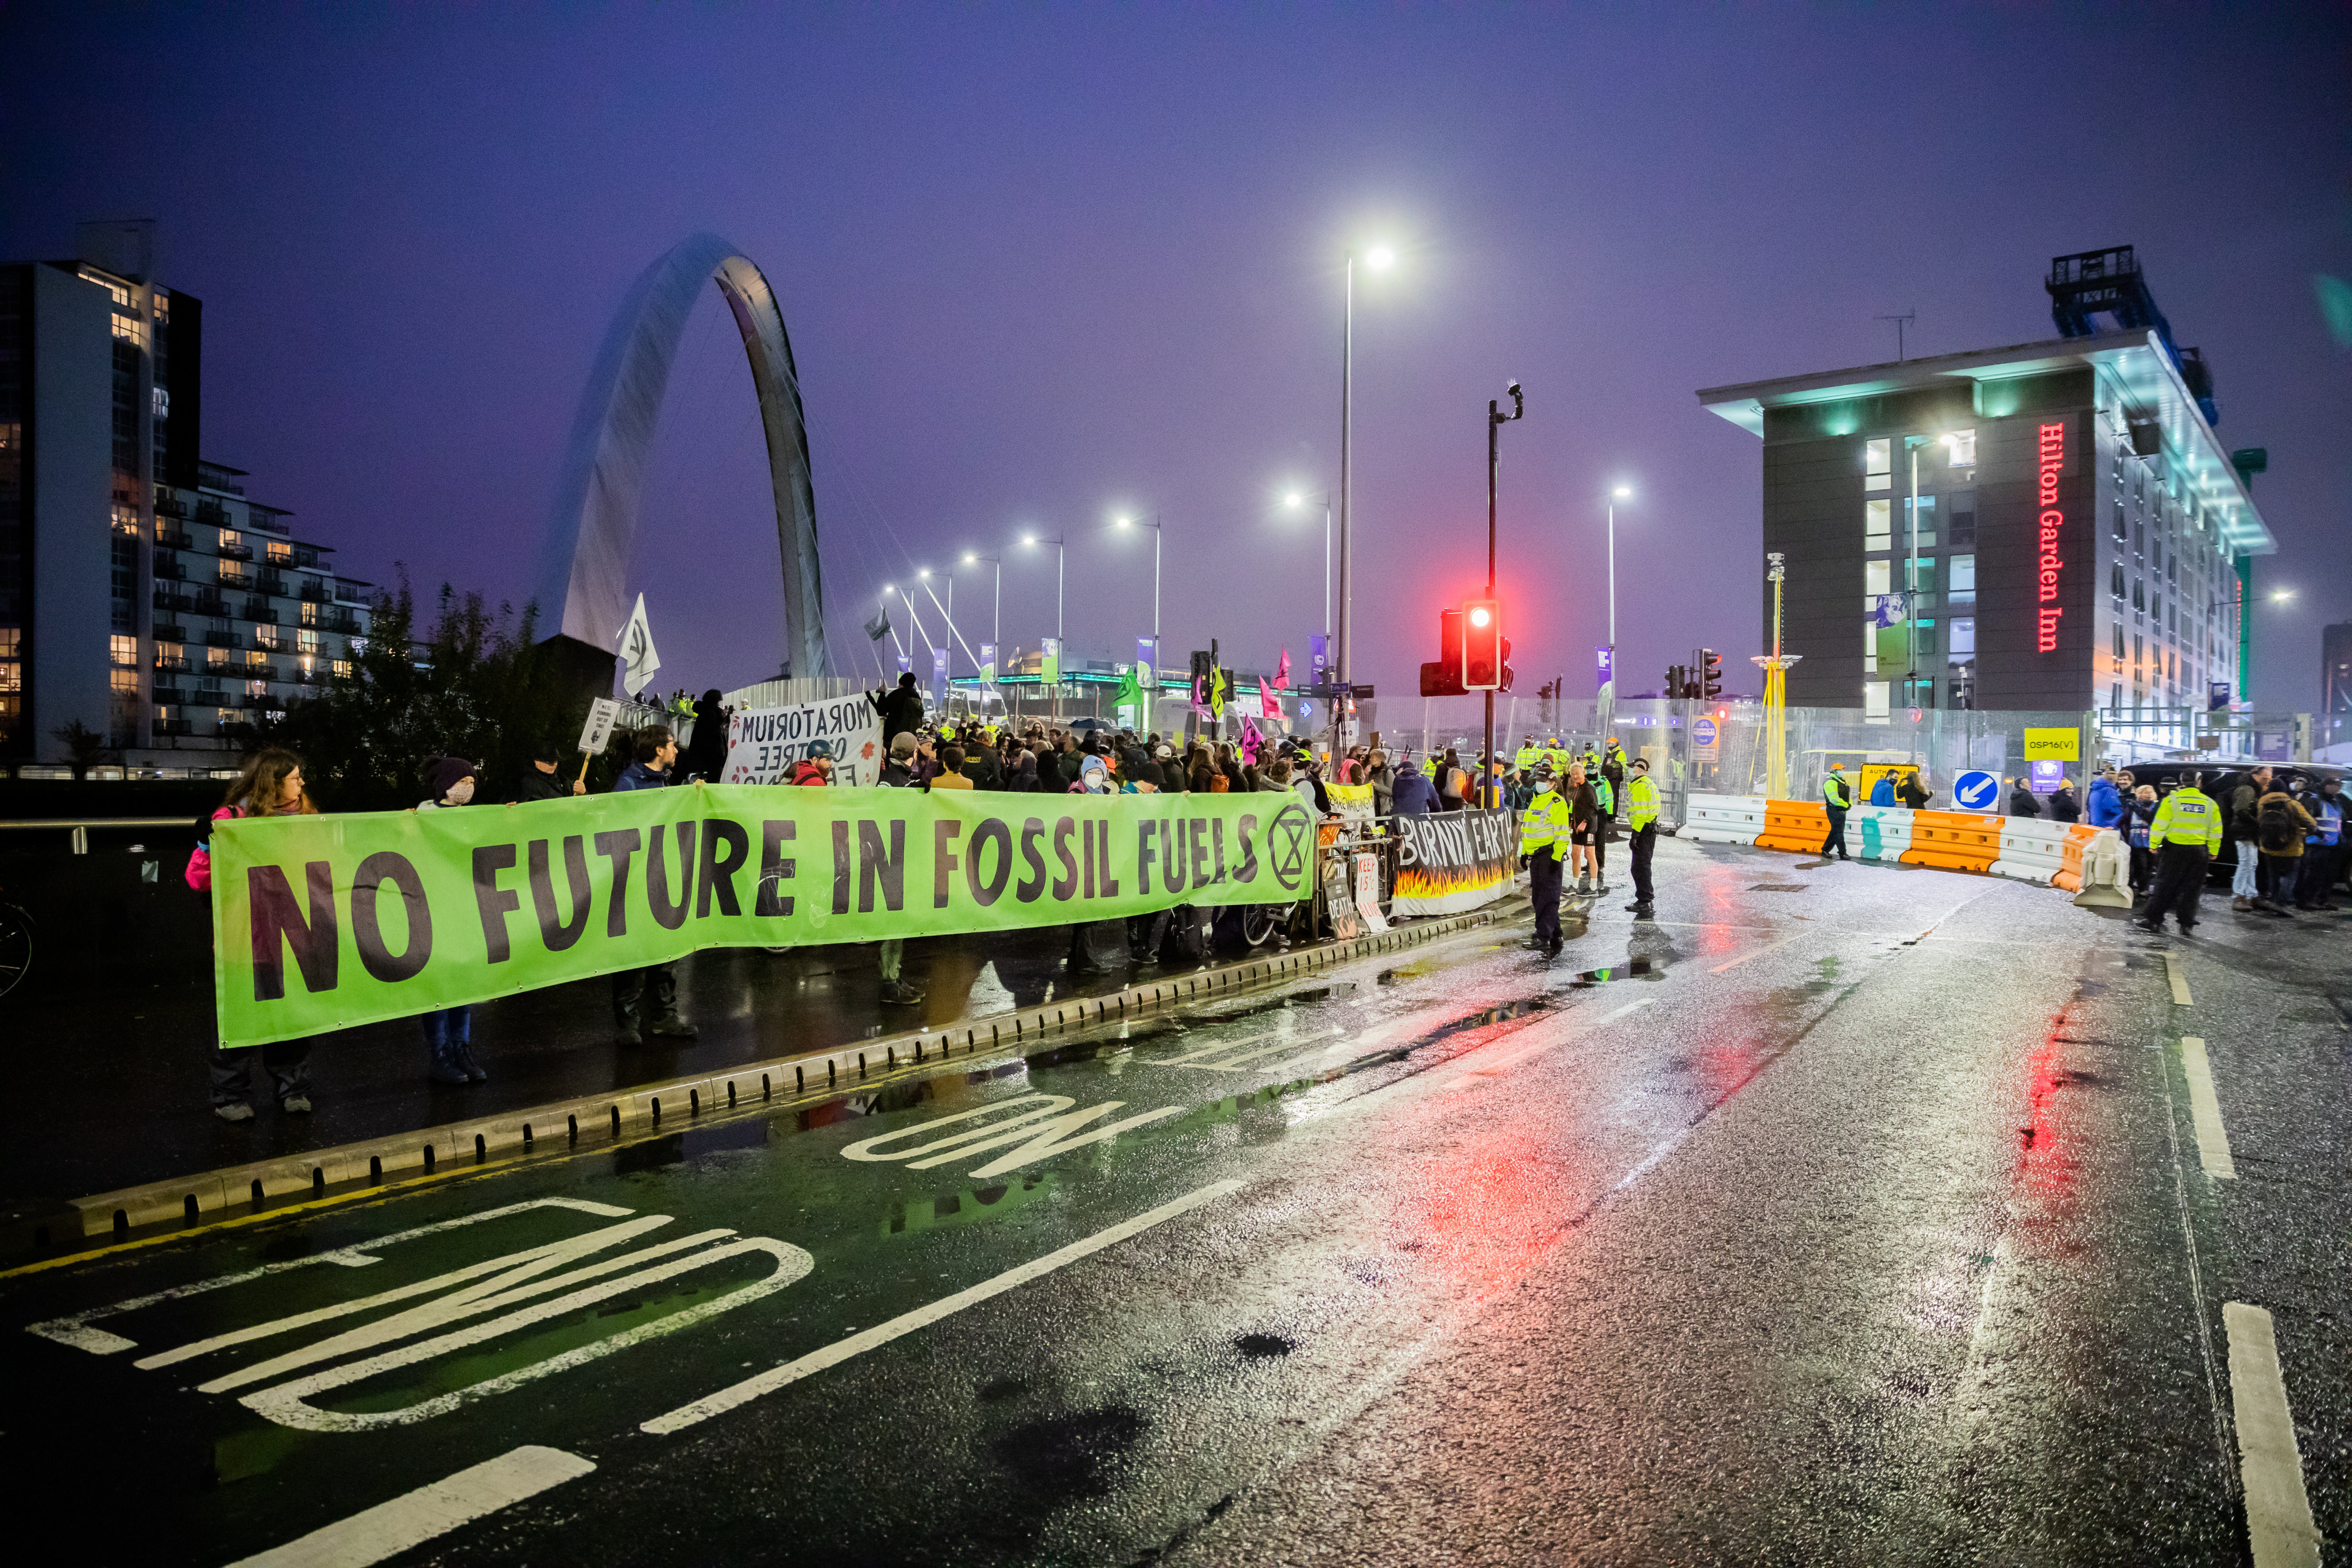 Activists demonstrate for better climate protection, during the COP26 UN Climate Change Conference in Glasgow, Scotland, on November 8. Photo: DPA